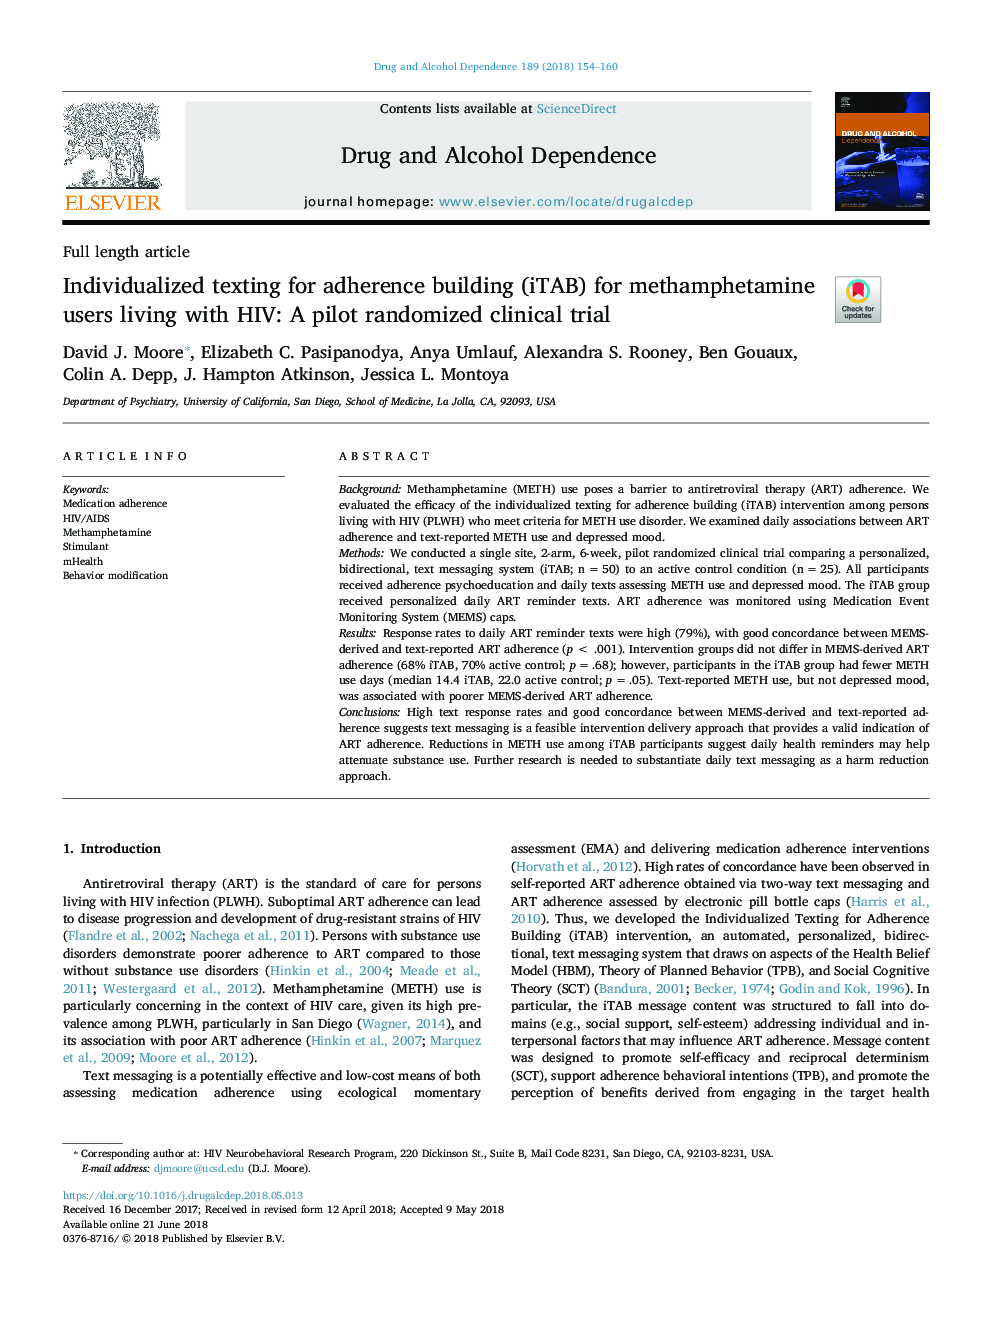 Individualized texting for adherence building (iTAB) for methamphetamine users living with HIV: A pilot randomized clinical trial